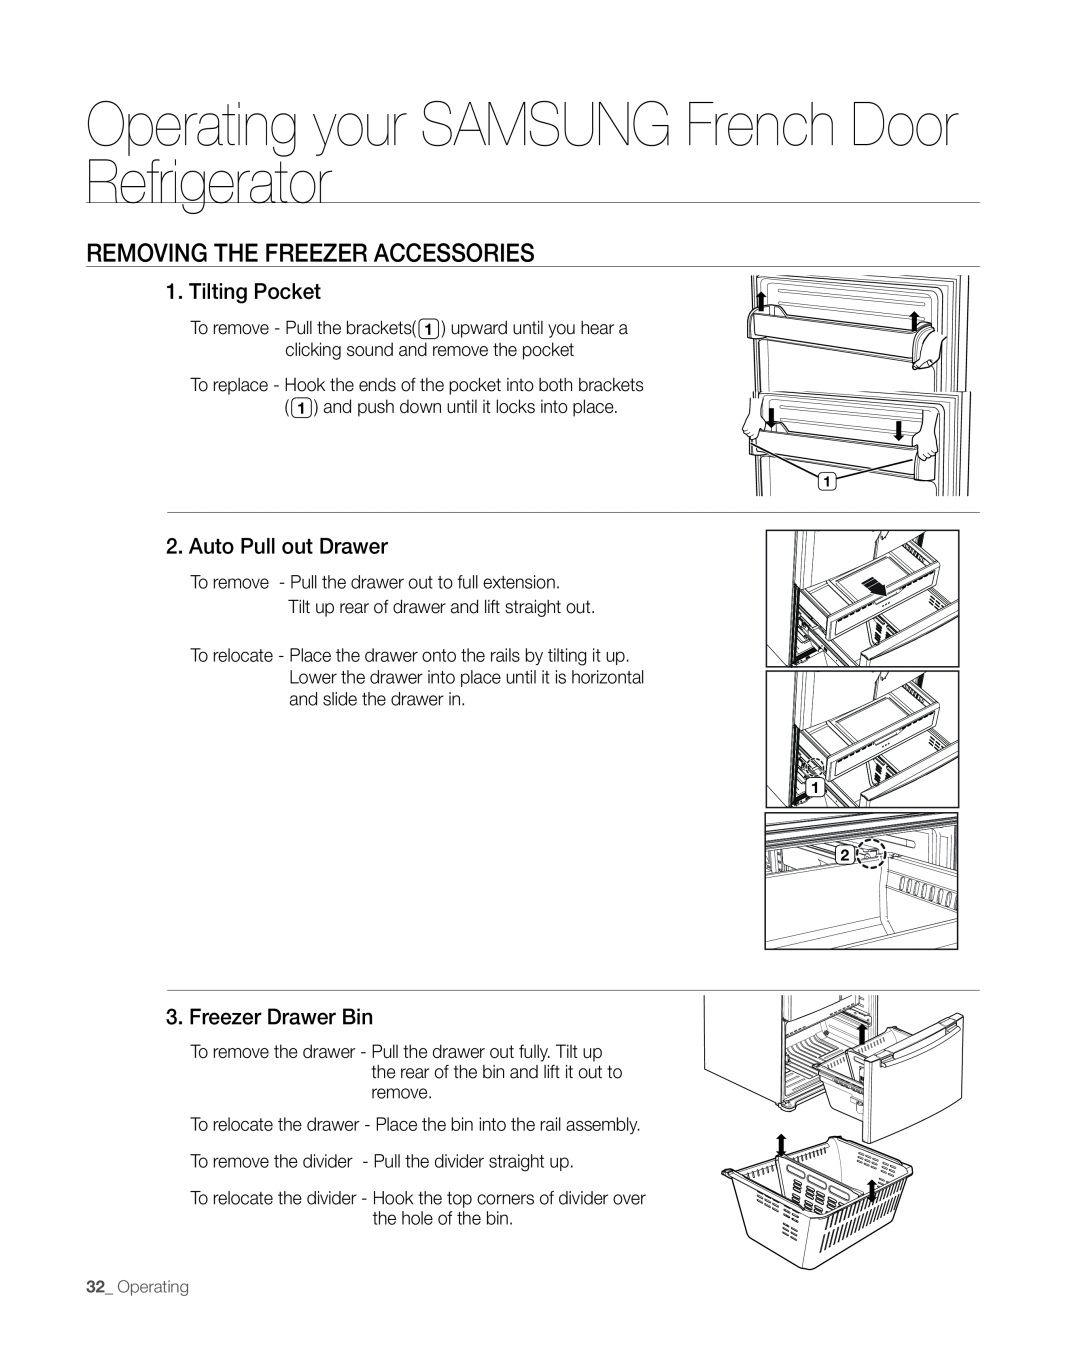 Sears RFG297AA manual Removing The Freezer Accessories, Tilting Pocket, Auto Pull out Drawer, Freezer Drawer Bin 